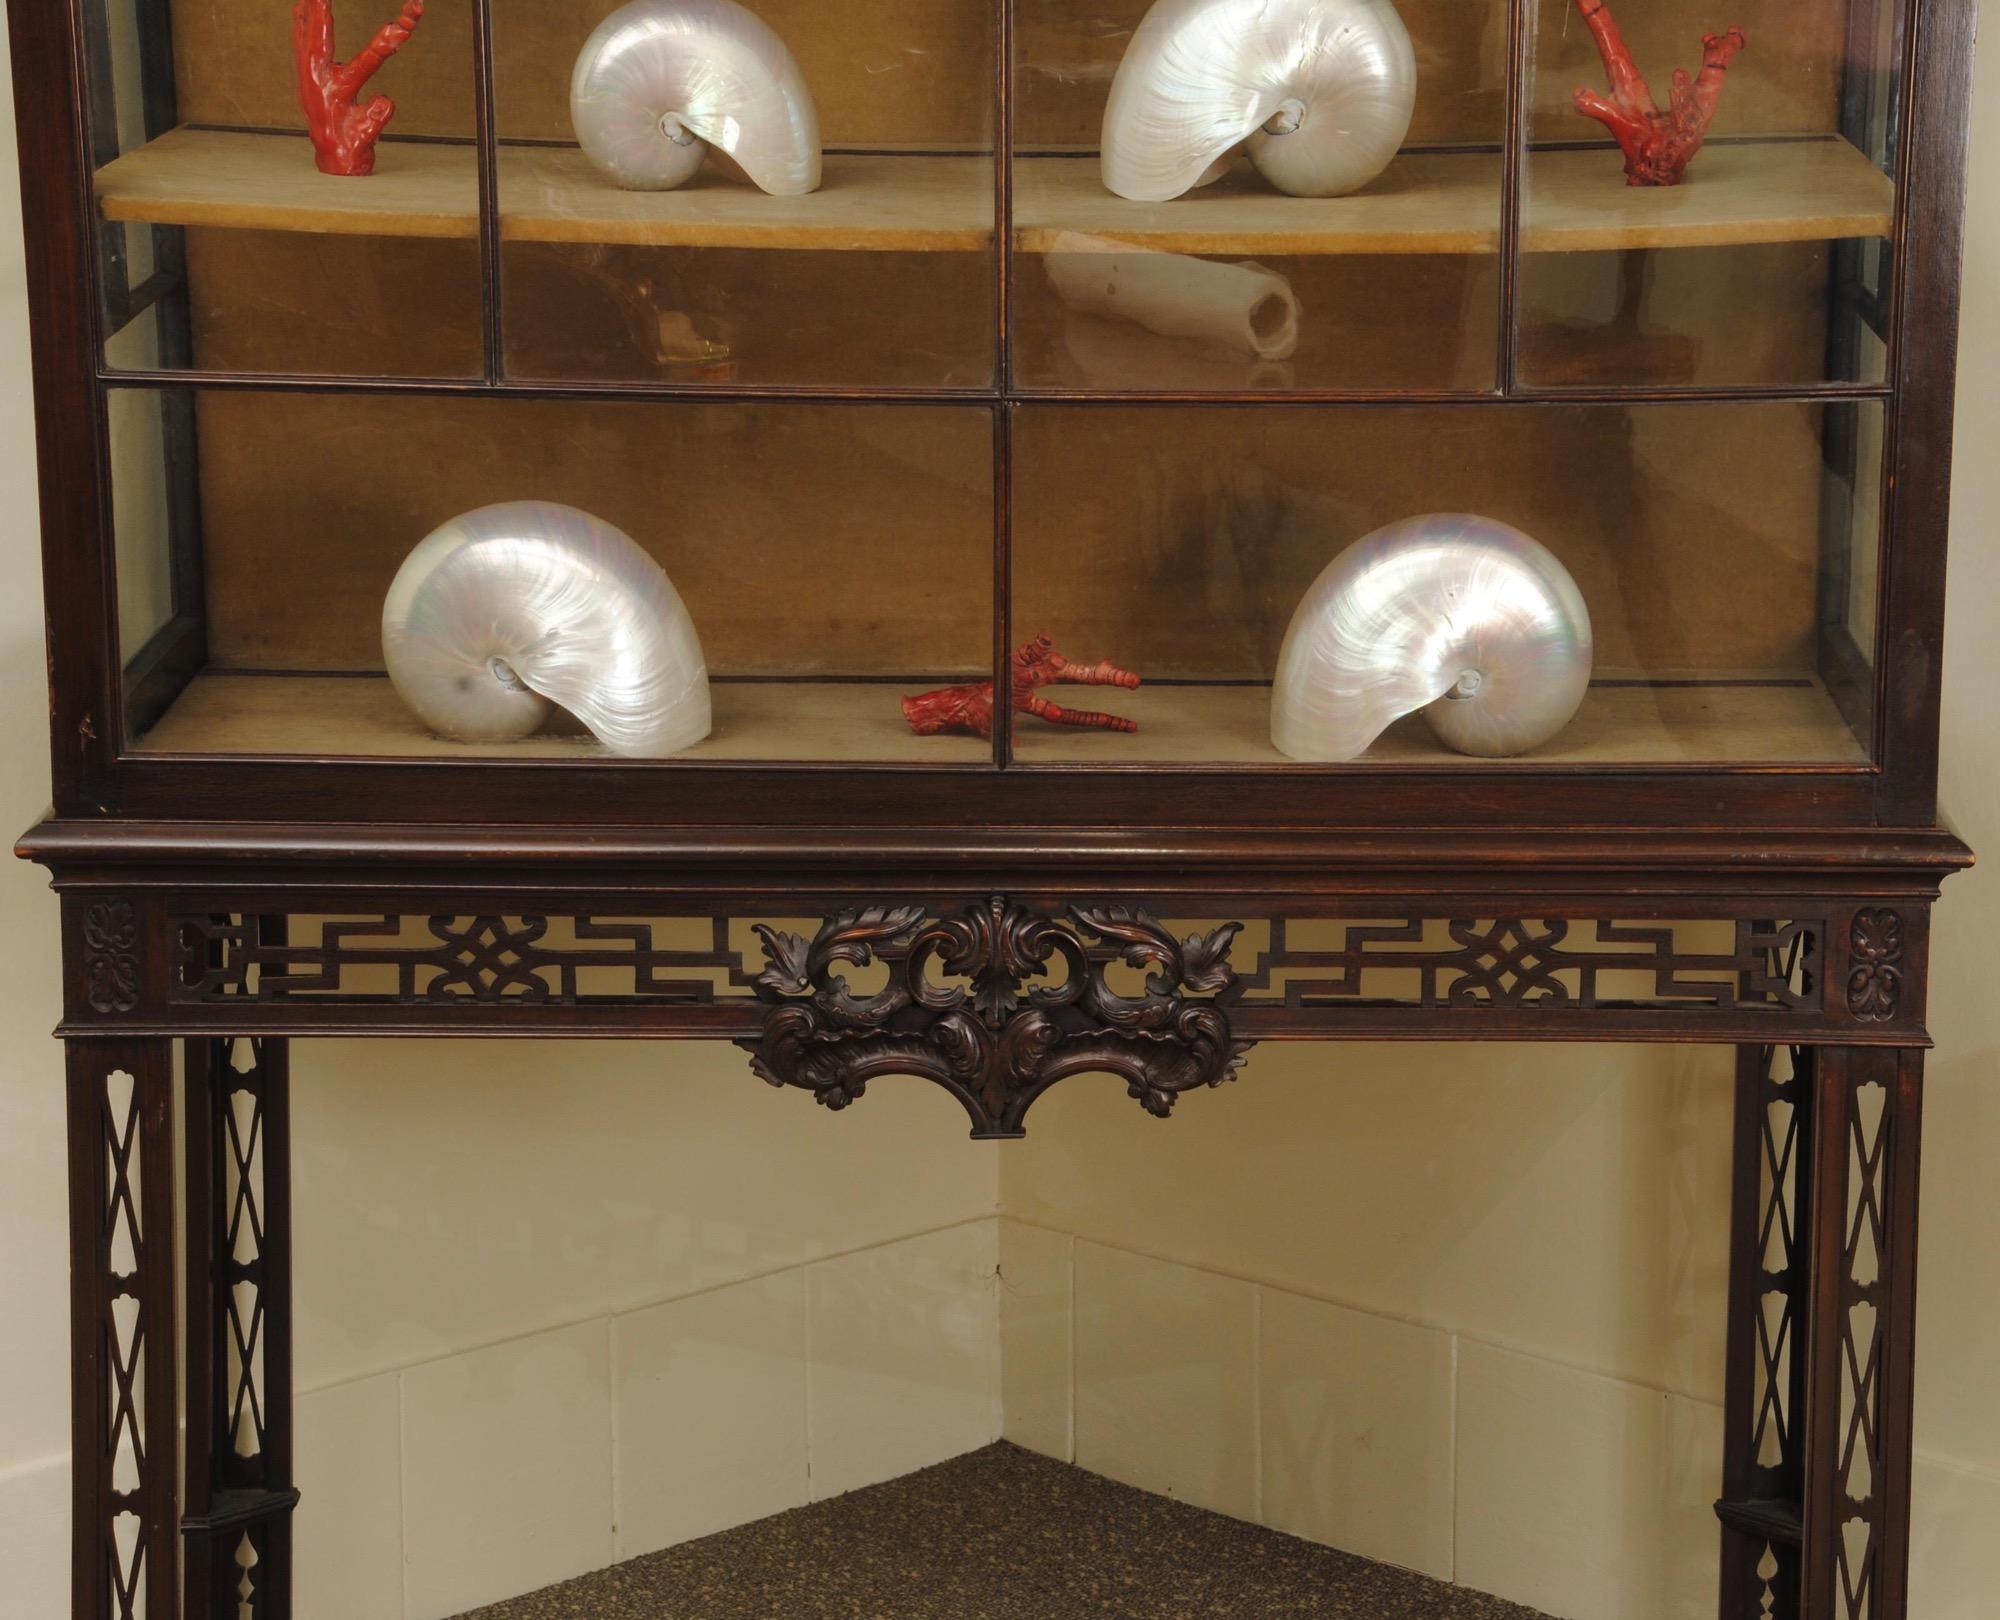 A 19th century mahogany display cabinet with finely carved details and open fret work legs to the stand, the upper section with glazed sides and front with pagoda shaped glazing bars and again with carved details.

From the second half of the 19th